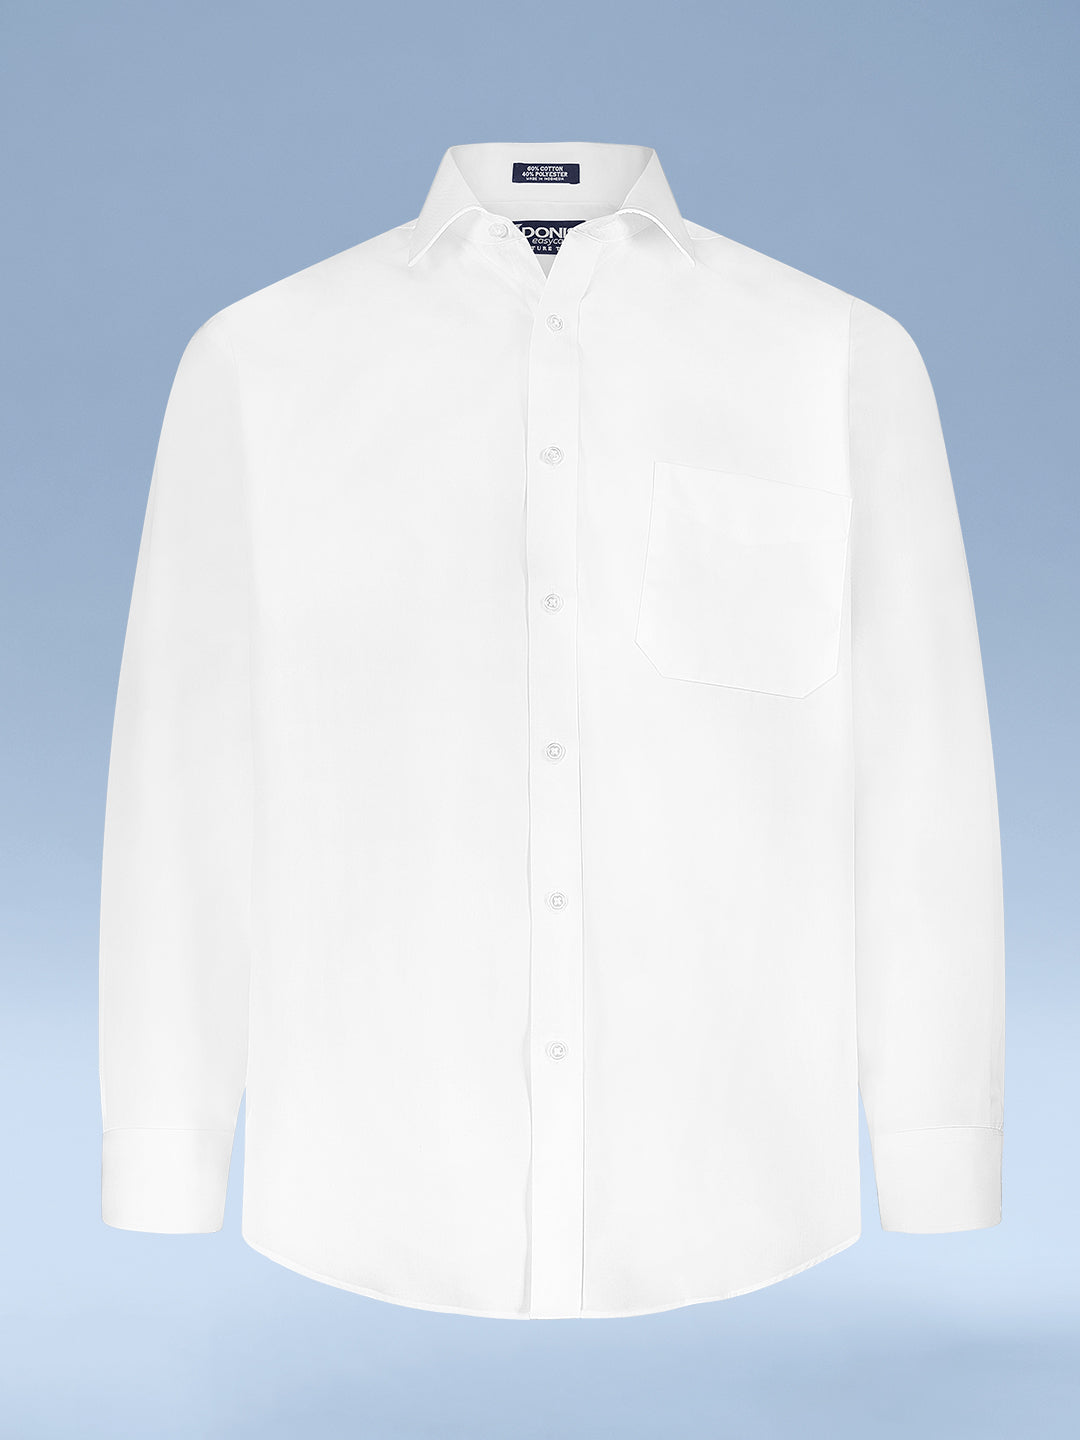 Mens Classic Fit Easy Care Signature Twill Dress Shirt